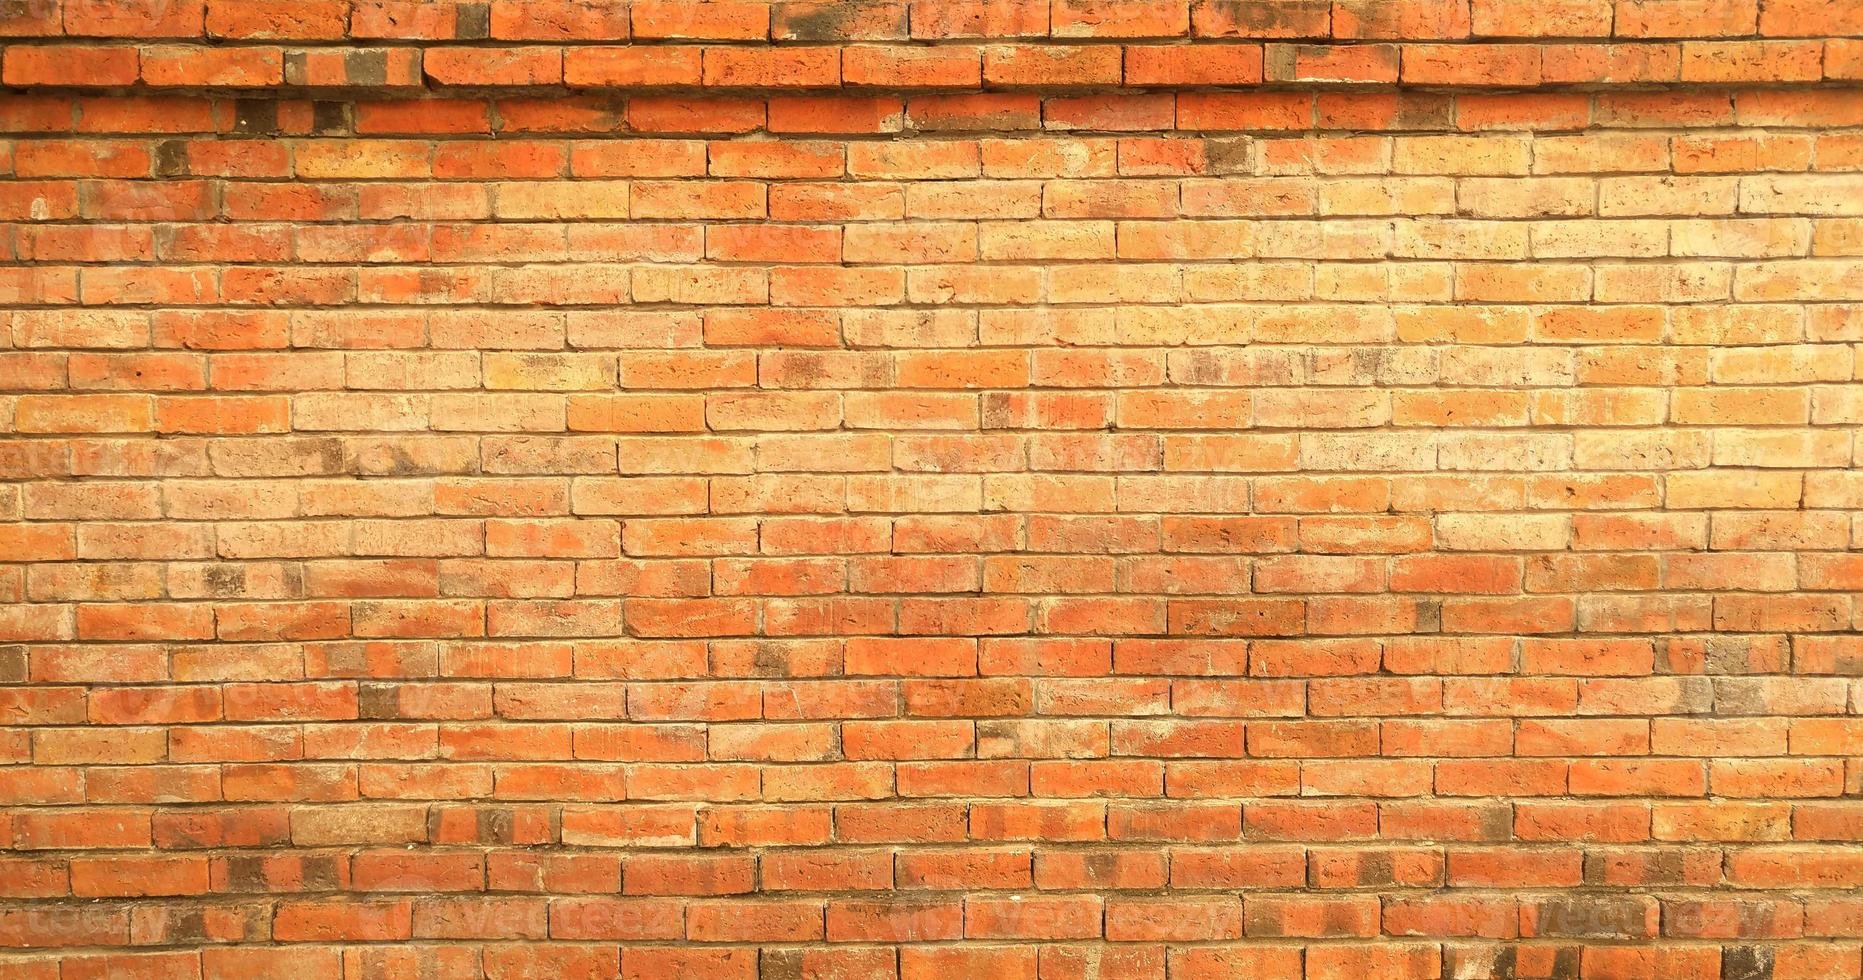 The brick wall pattern texture background photo